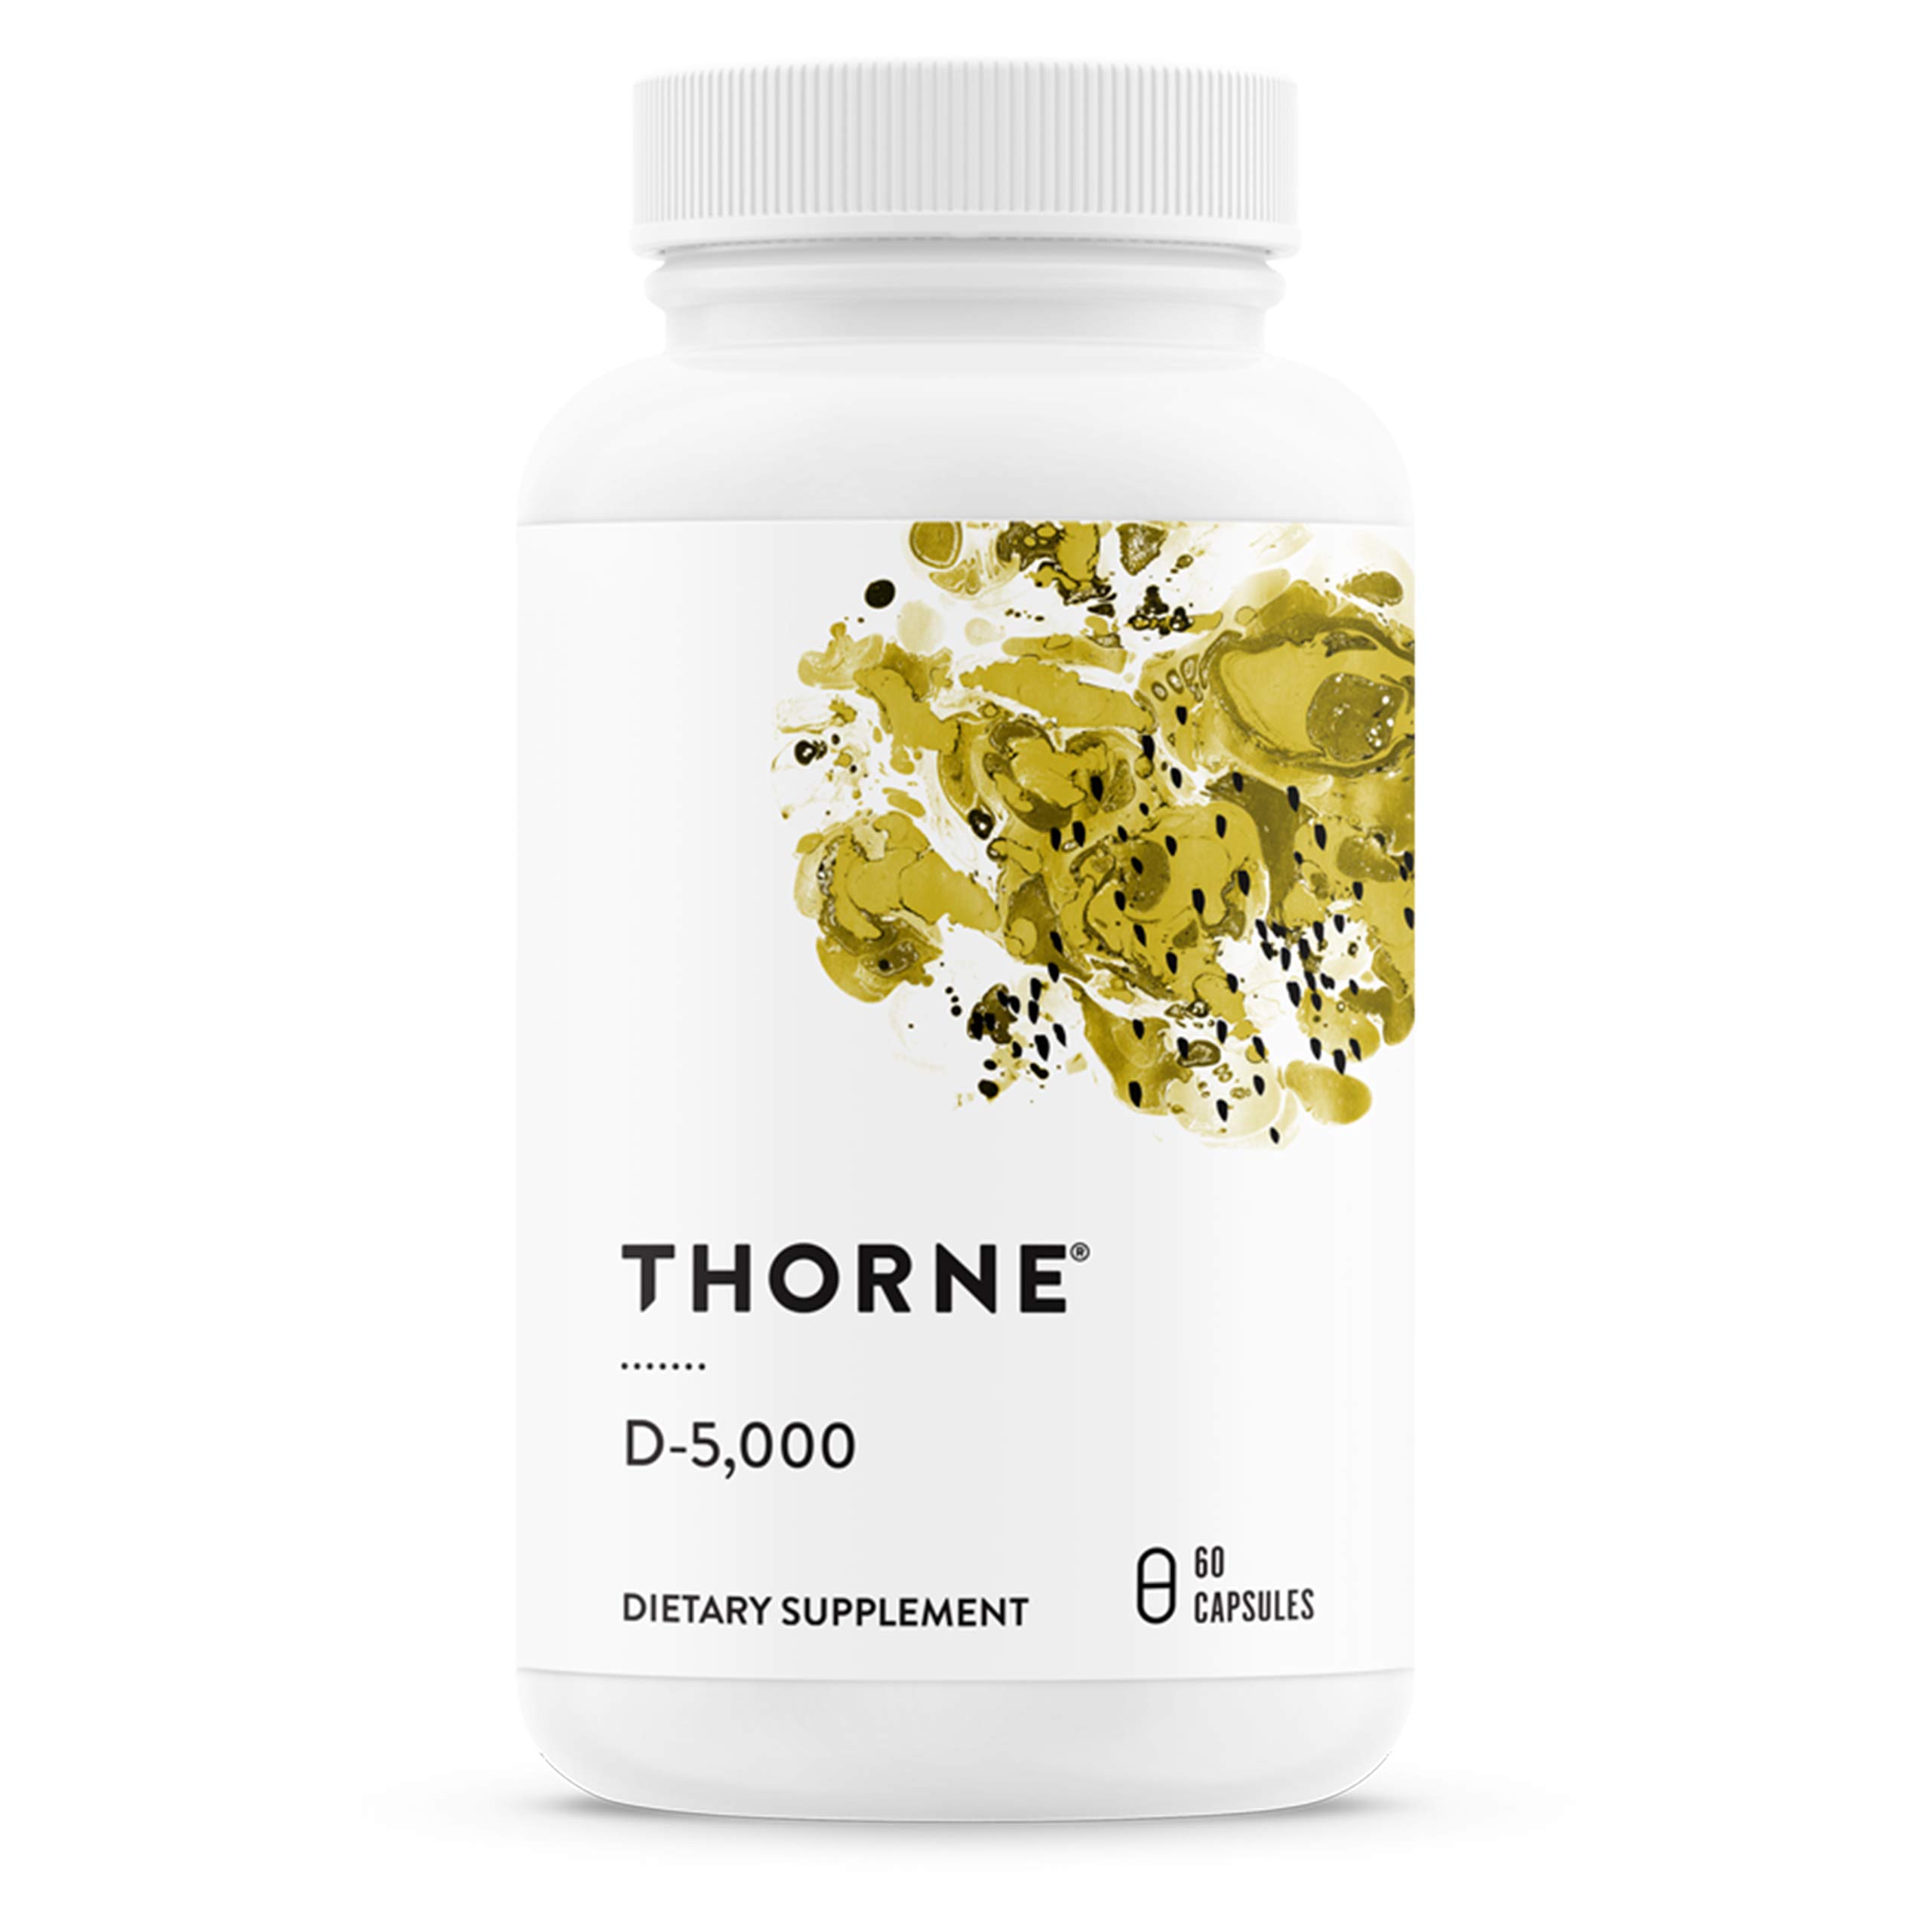 Thorne Vitamin D-5000 - Vitamin D3 Supplement - 5,000 IU - Support Healthy Bones, Teeth, Muscles, Cardiovascular, and Immune Function - NSF Certified for Sport - Dairy-Free, Soy-Free - 60 Capsules